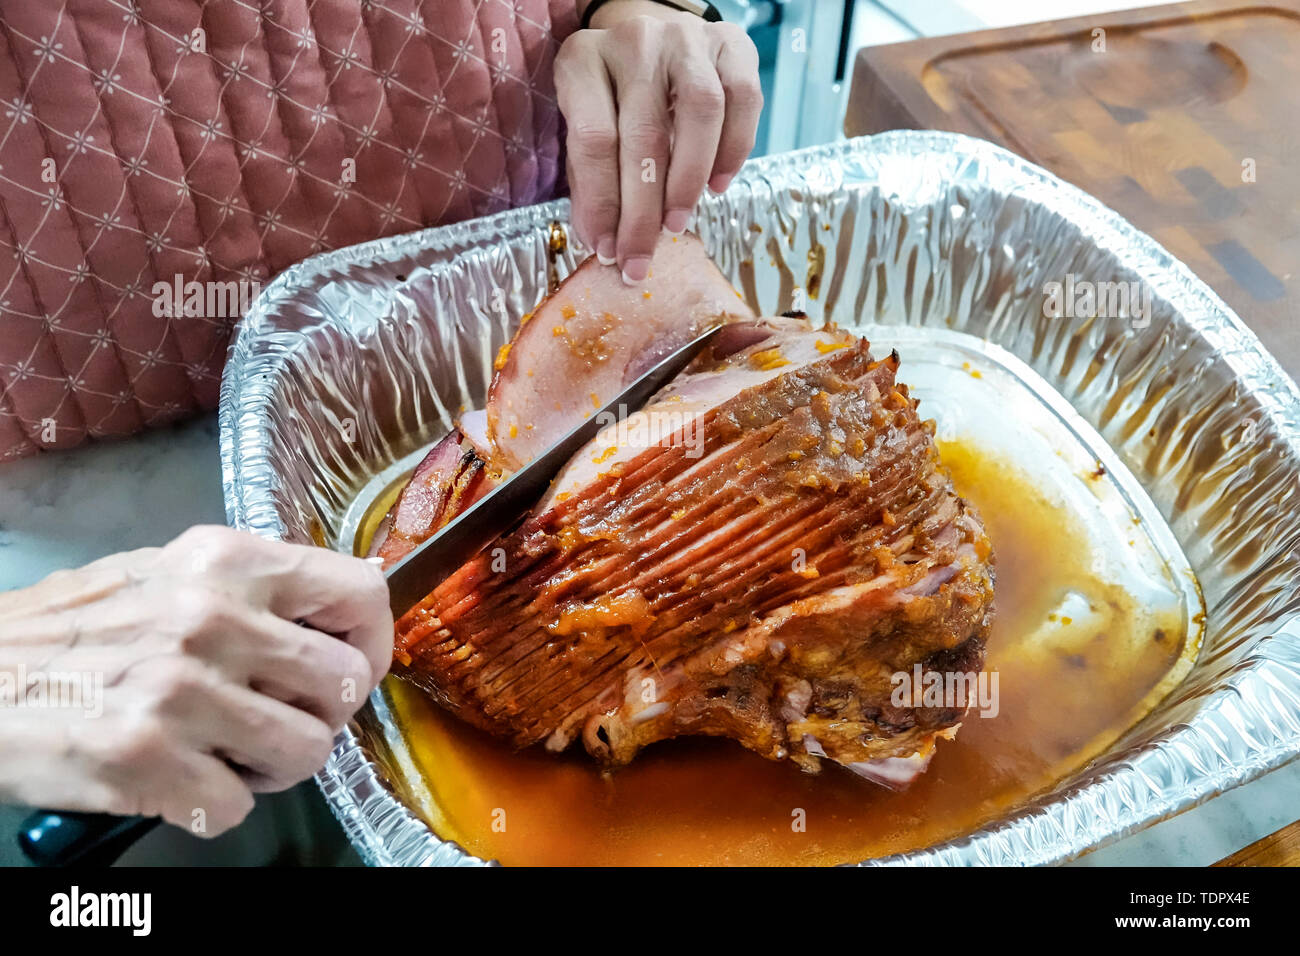 Miami Florida,Christmas winter holiday dinner,cooked,spiral cut ham,aluminum disposable roasting tray,knife,cutting,FL190104004 Stock Photo